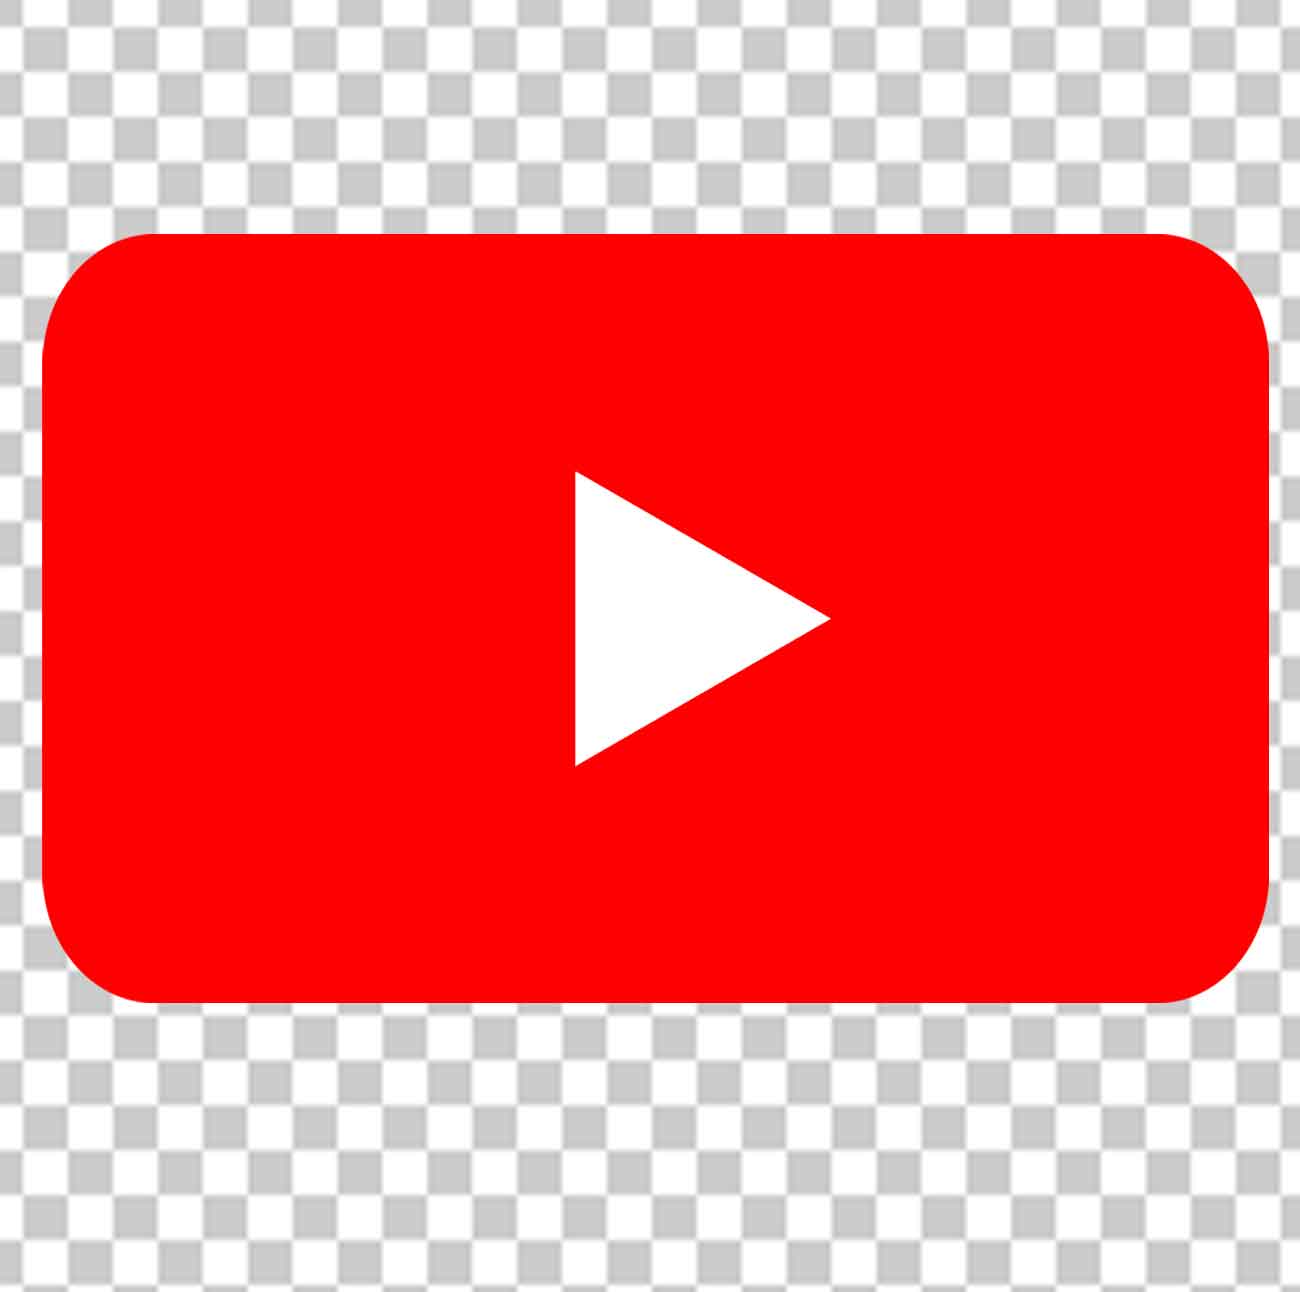 Youtube Transparent Logo Free High Quility Image Download The Mayanagari